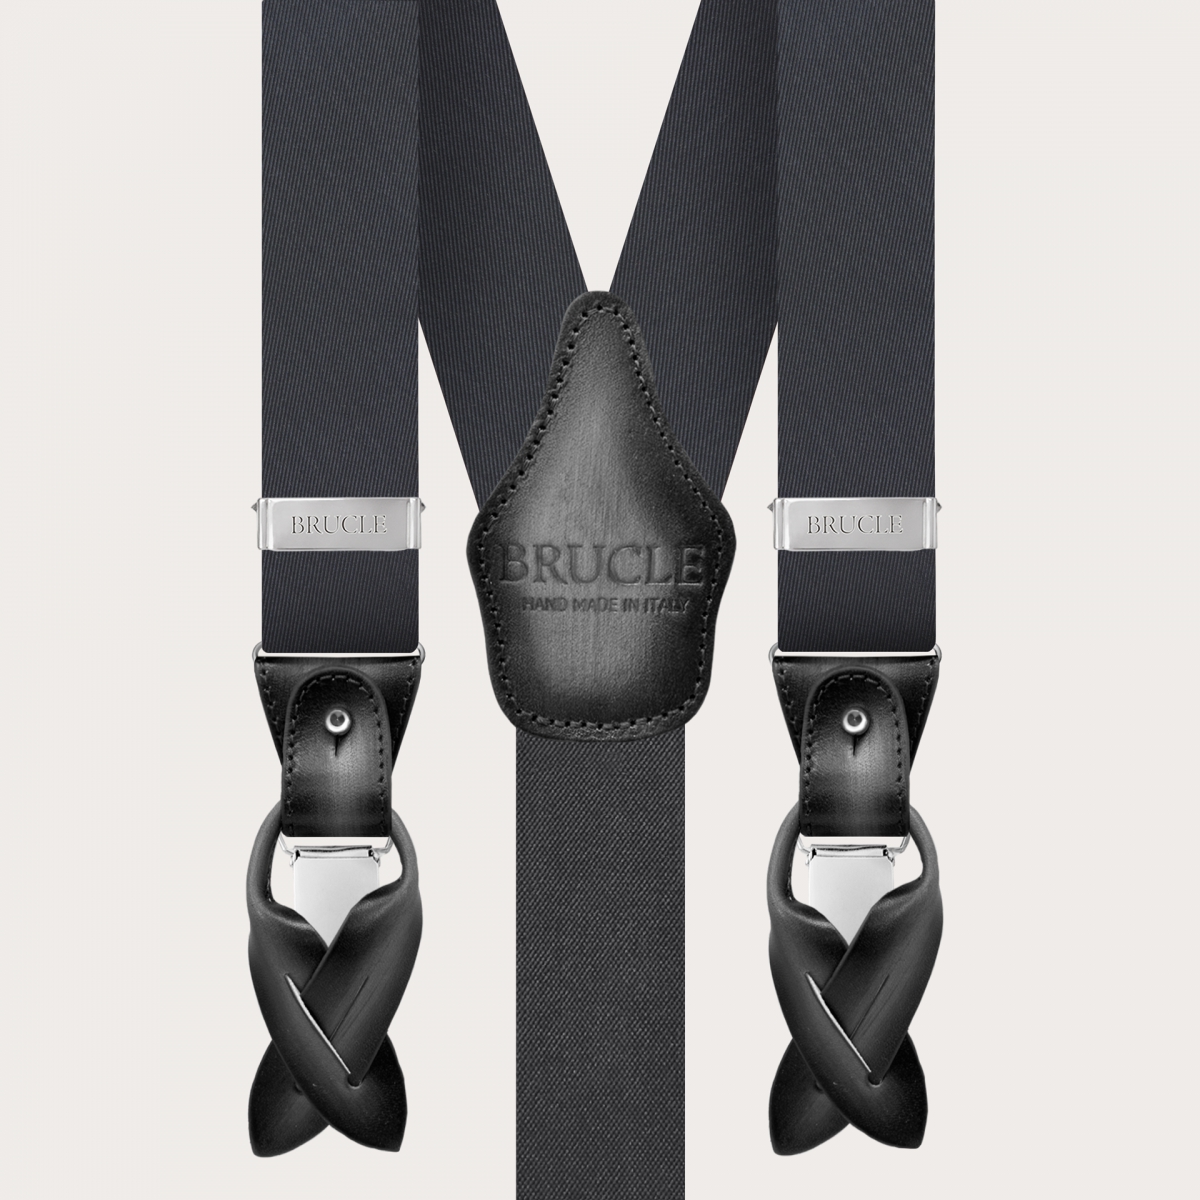 Elegant grey silk suspenders with hand-shaded leather parts